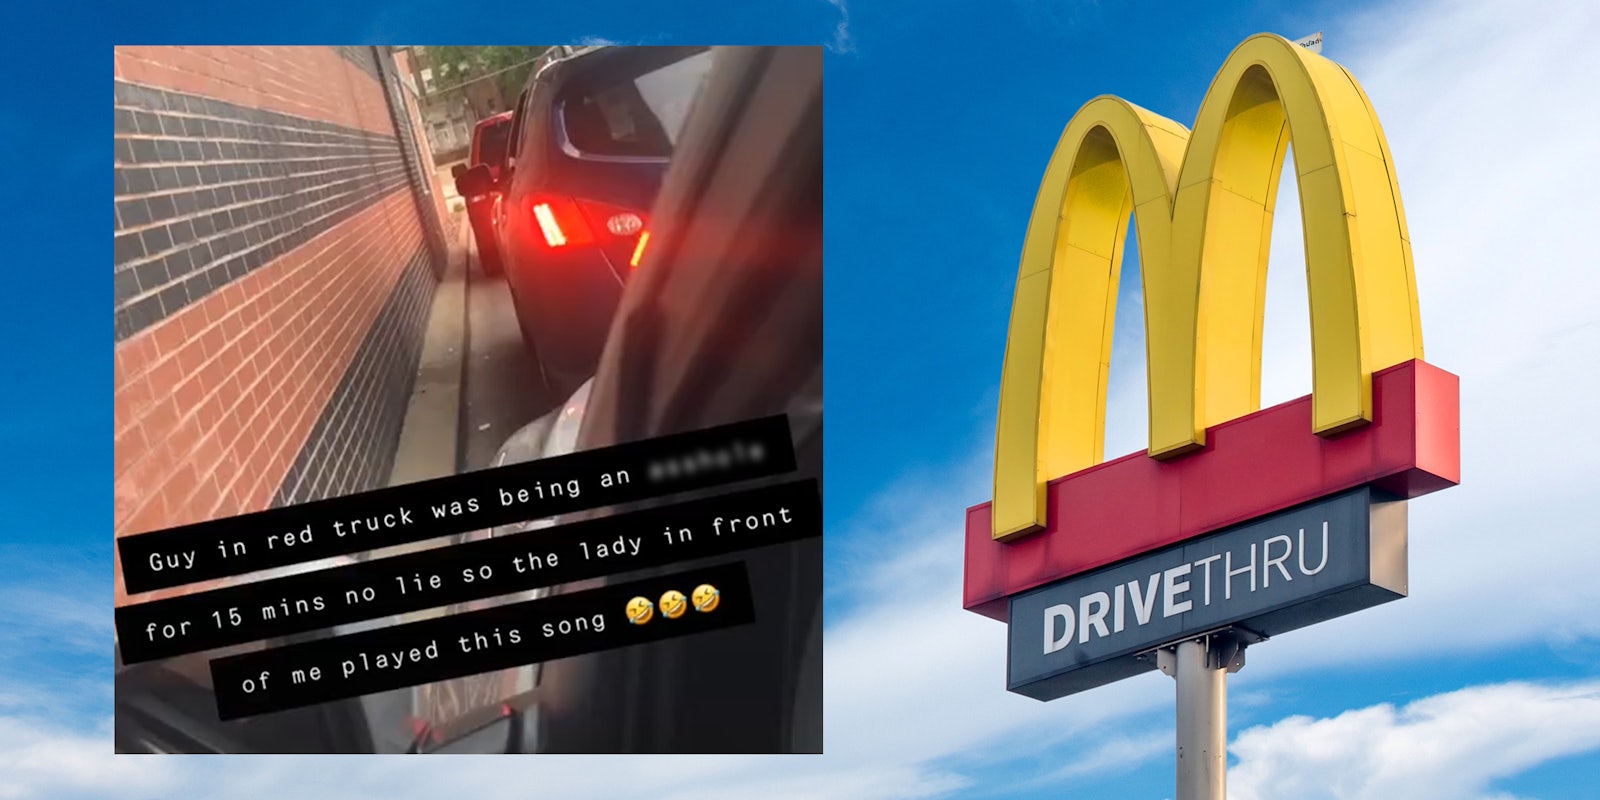 McDonald's DRIVETHRU sign with photo inset of vehicles blocking drive thru lane with caption 'Guy in red truck was being an asshole for 15 mins no lie so the lady in front of me played this song' move b*tch